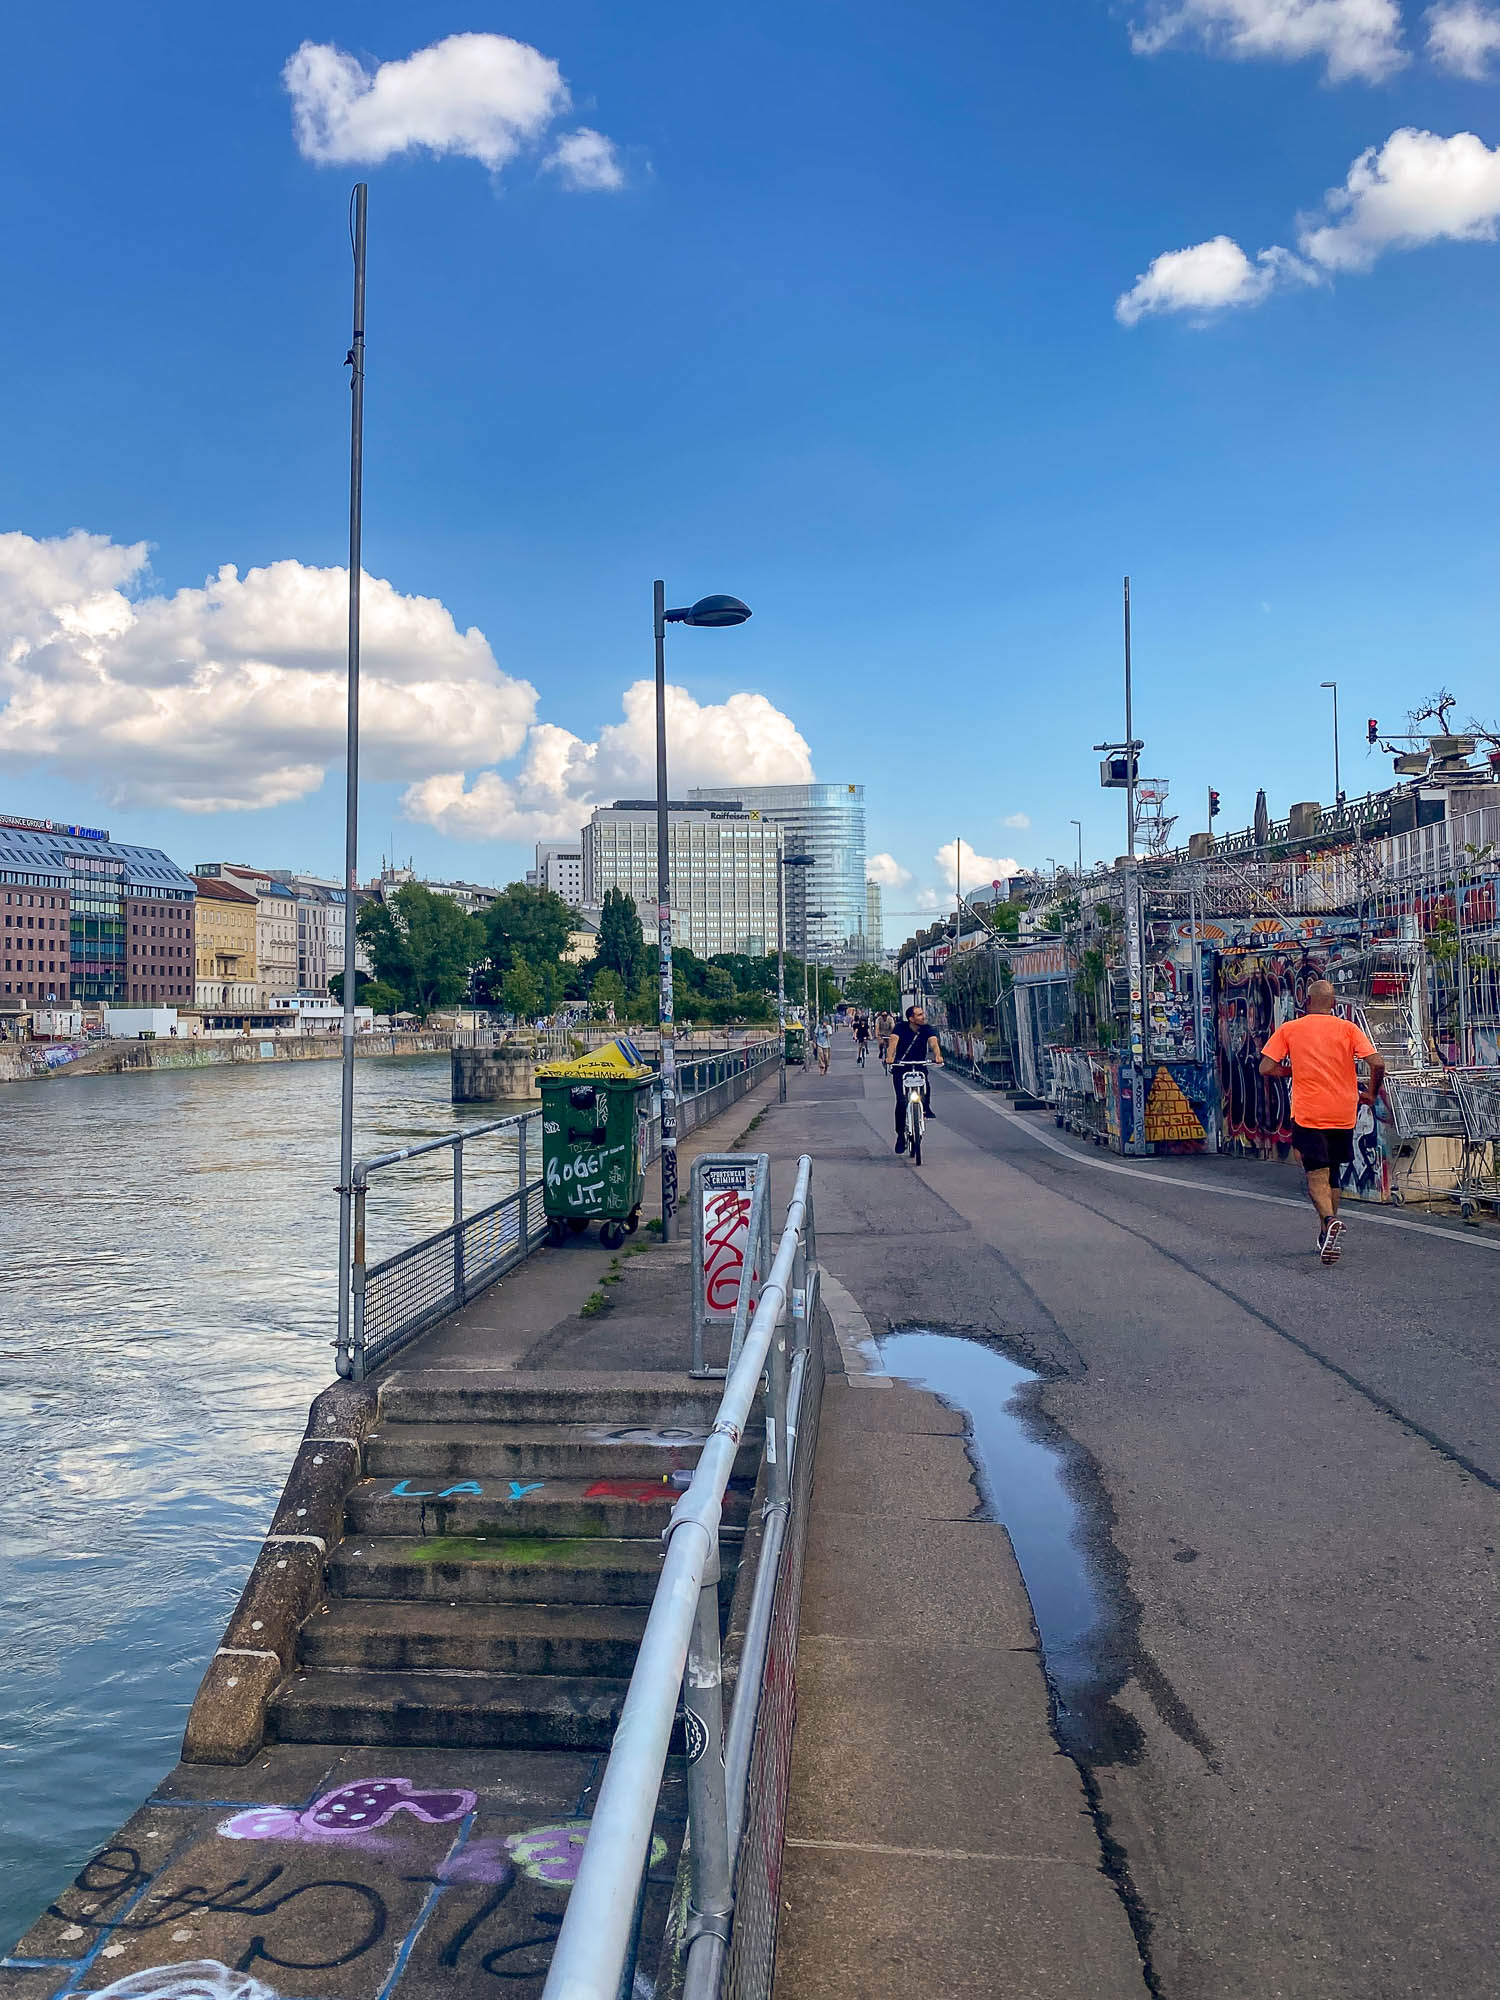 A riverside walkway with two people, one cycling and one walking. Graffiti, urban art, and market stalls line the path under a blue sky with clouds.